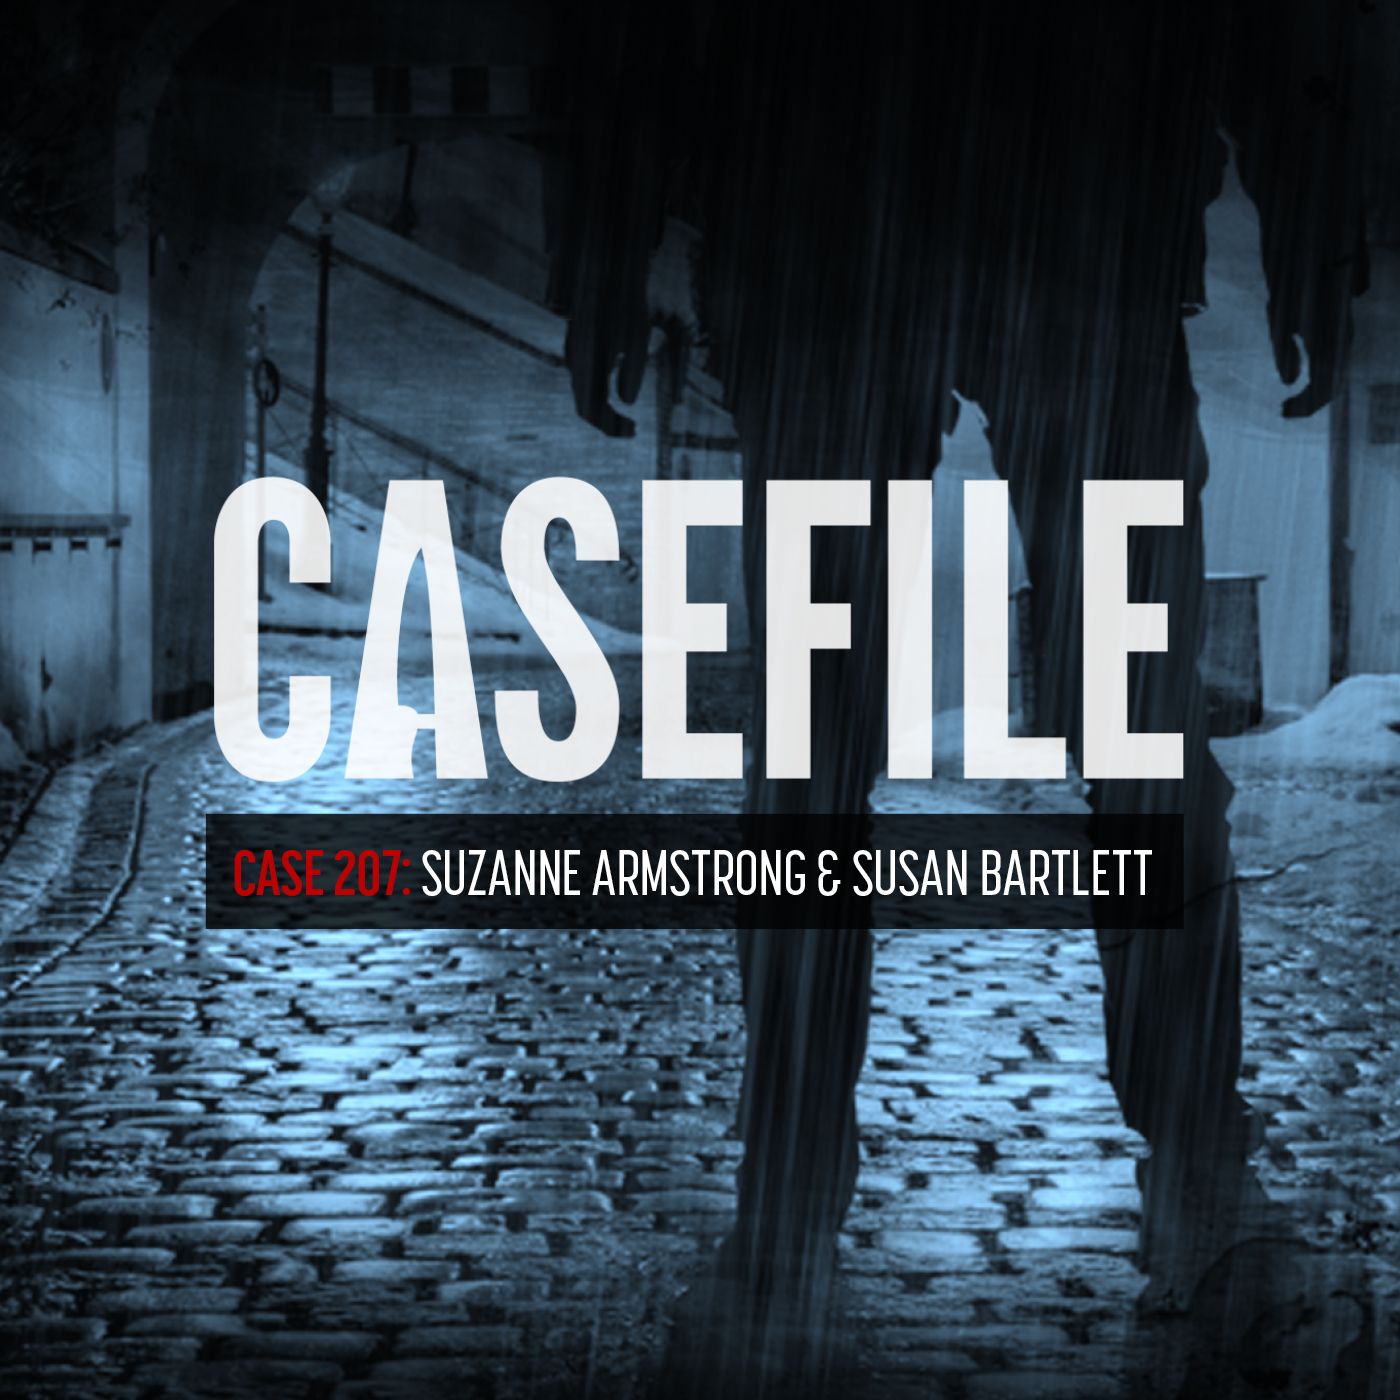 Case 207: Suzanne Armstrong & Susan Bartlett